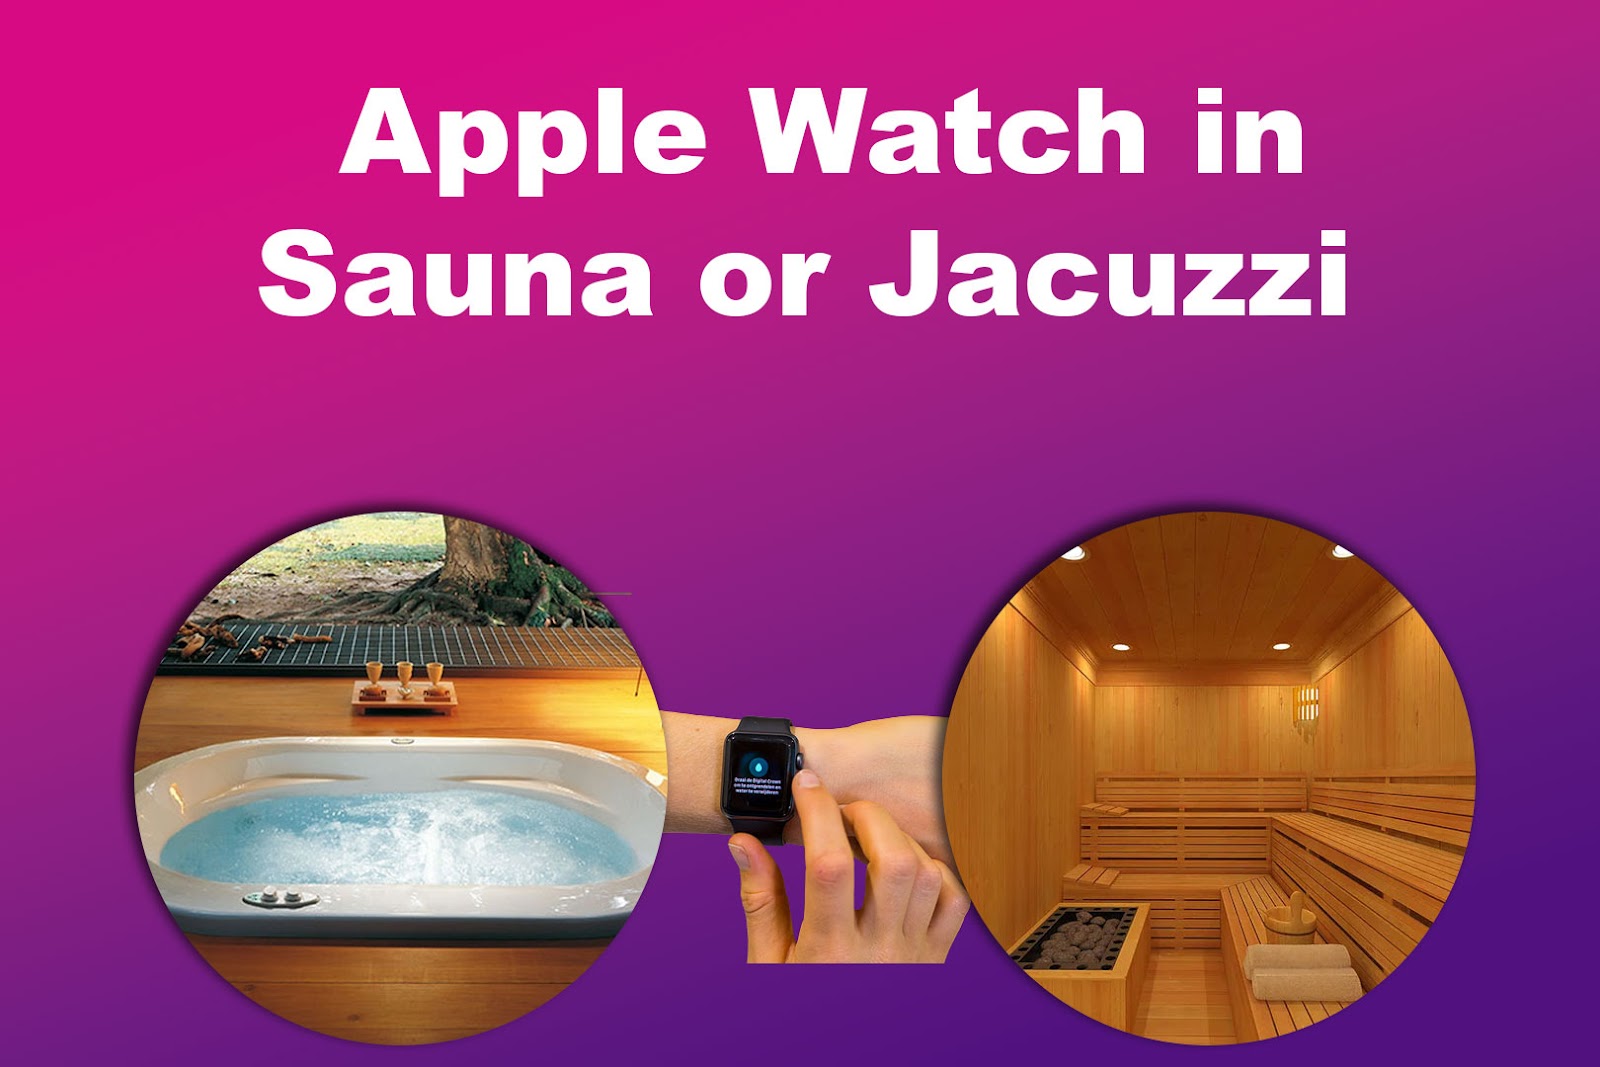 Apple Watch in Sauna or Jacuzzi